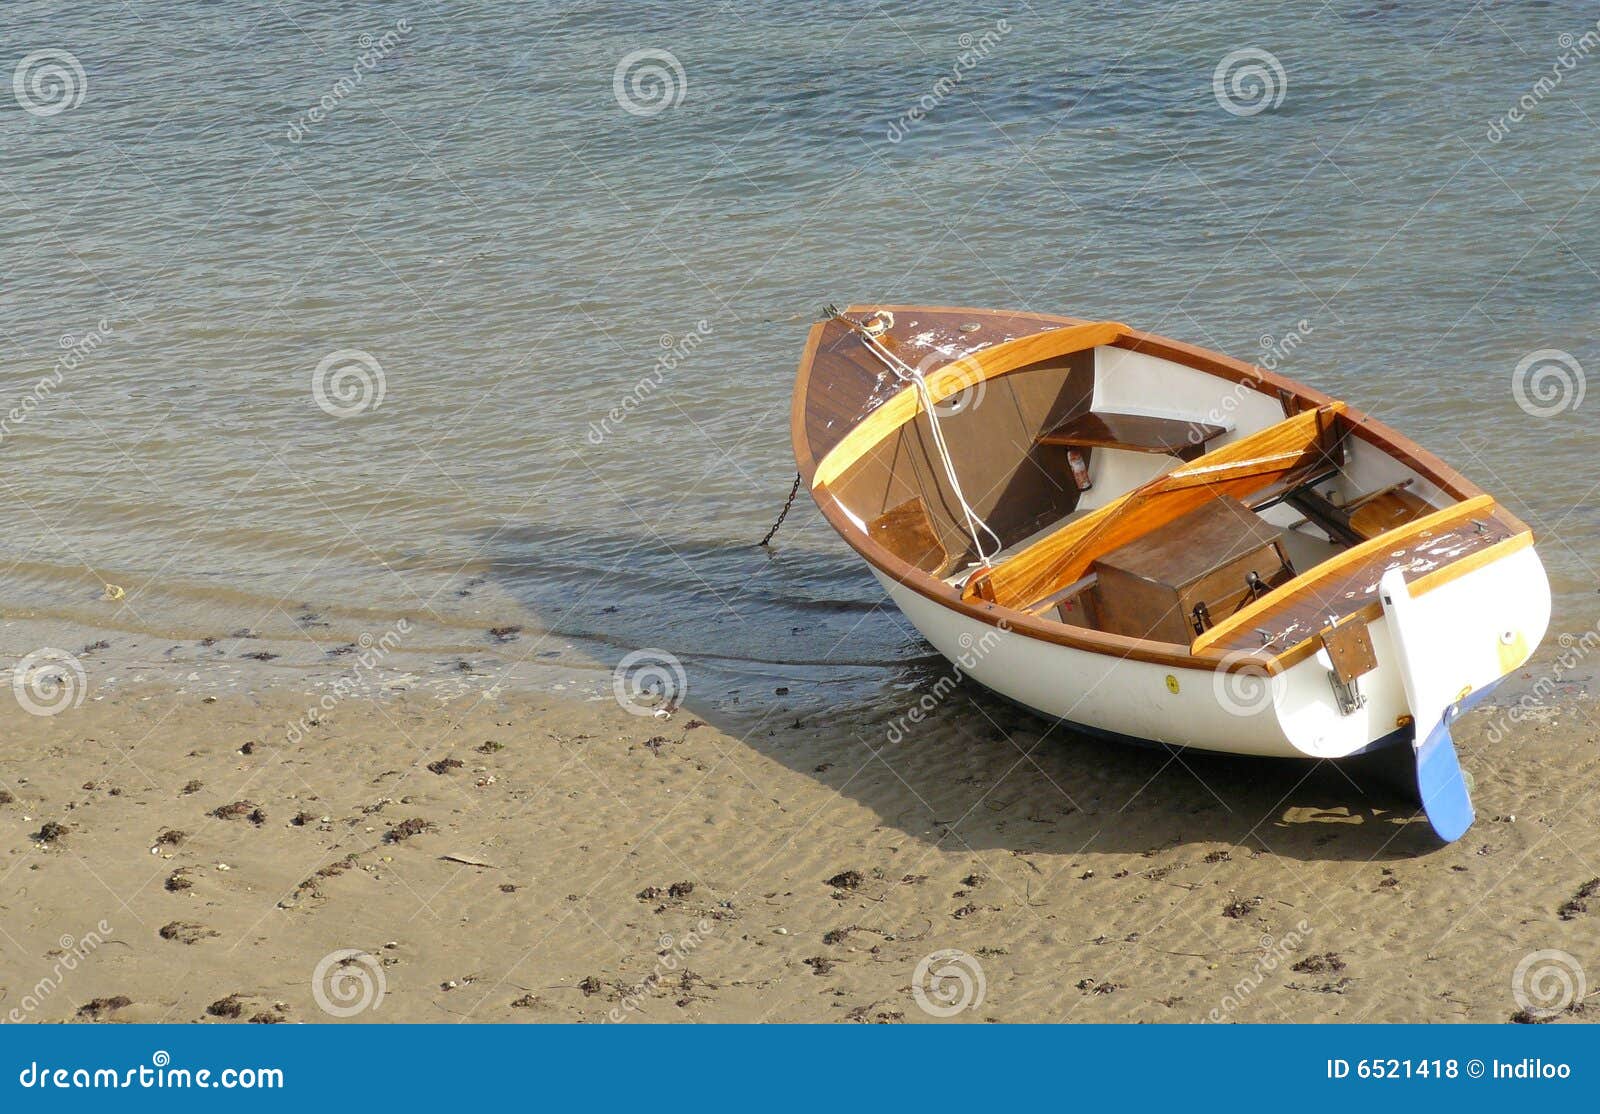 Wooden Boat Moored On Beach Royalty Free Stock Photos - Image: 6521418